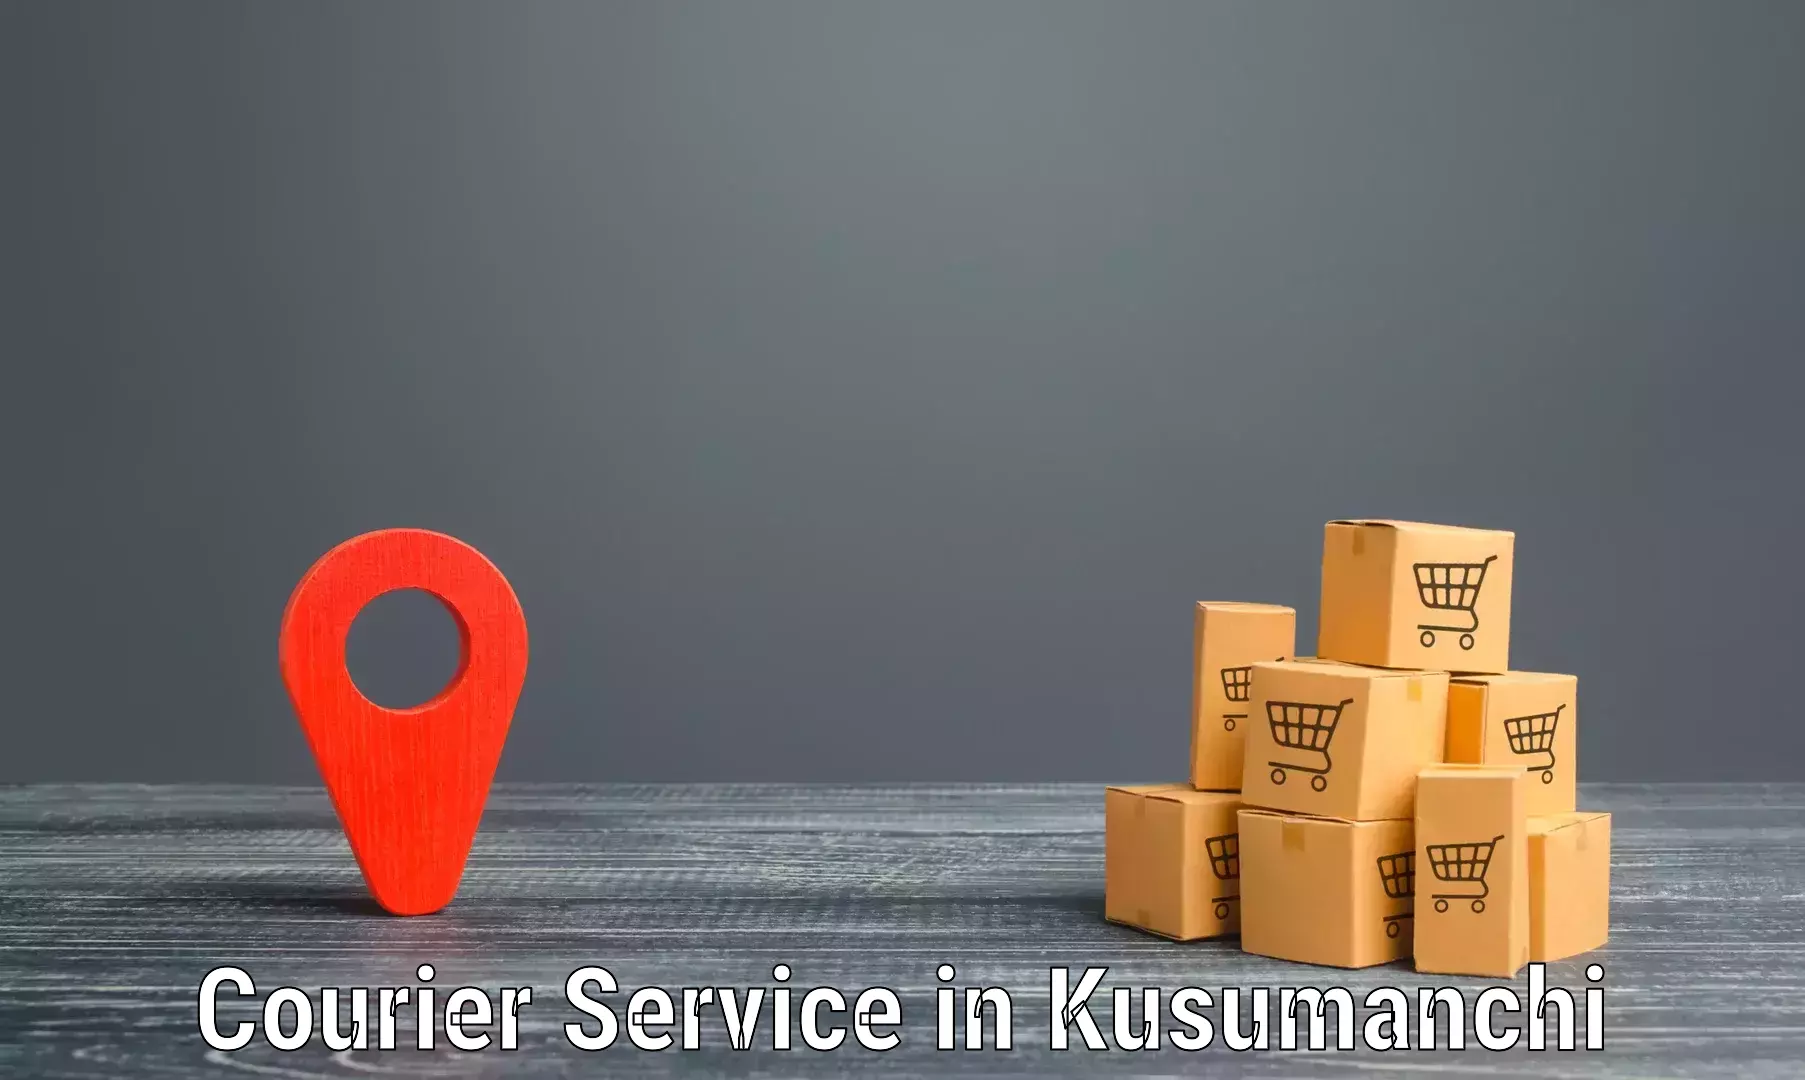 Cost-effective freight solutions in Kusumanchi